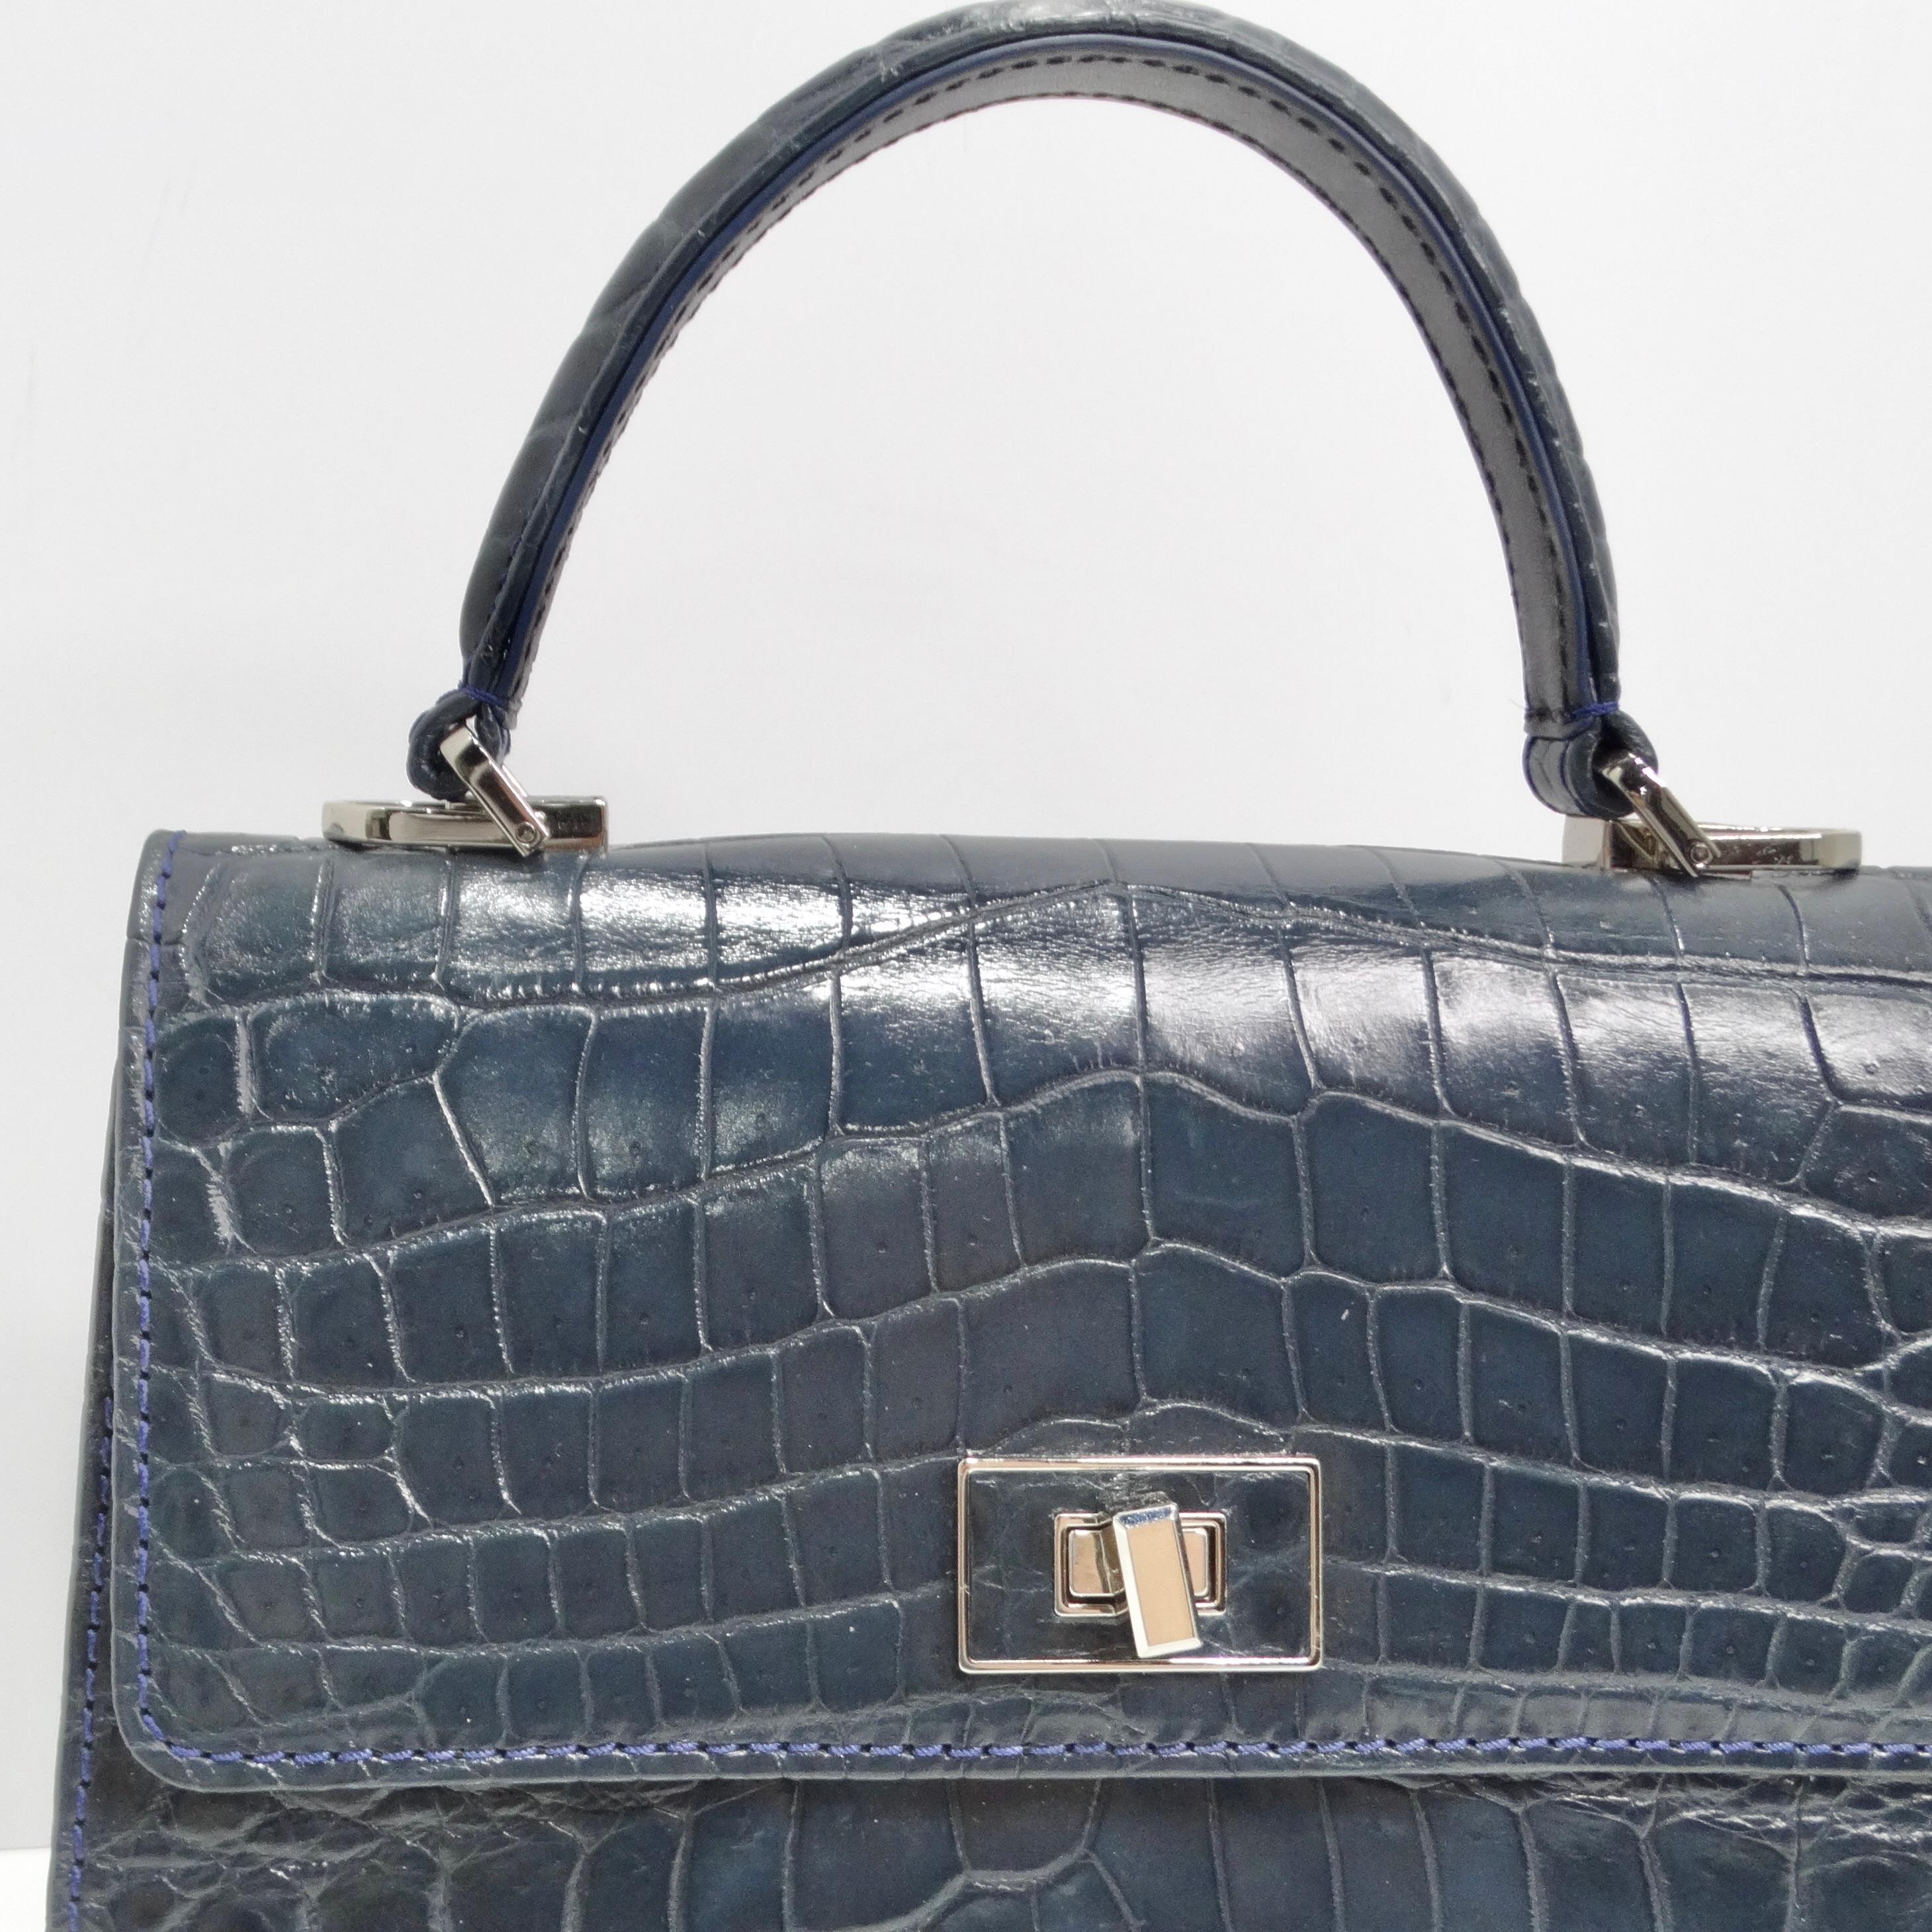 The BC Luxury Blue Crocodile Leather Top Handle Bag is a stunning accessory that combines timeless elegance with modern sophistication. Crafted from luxurious navy blue crocodile leather, this structured top handle bag is sure to elevate any outfit